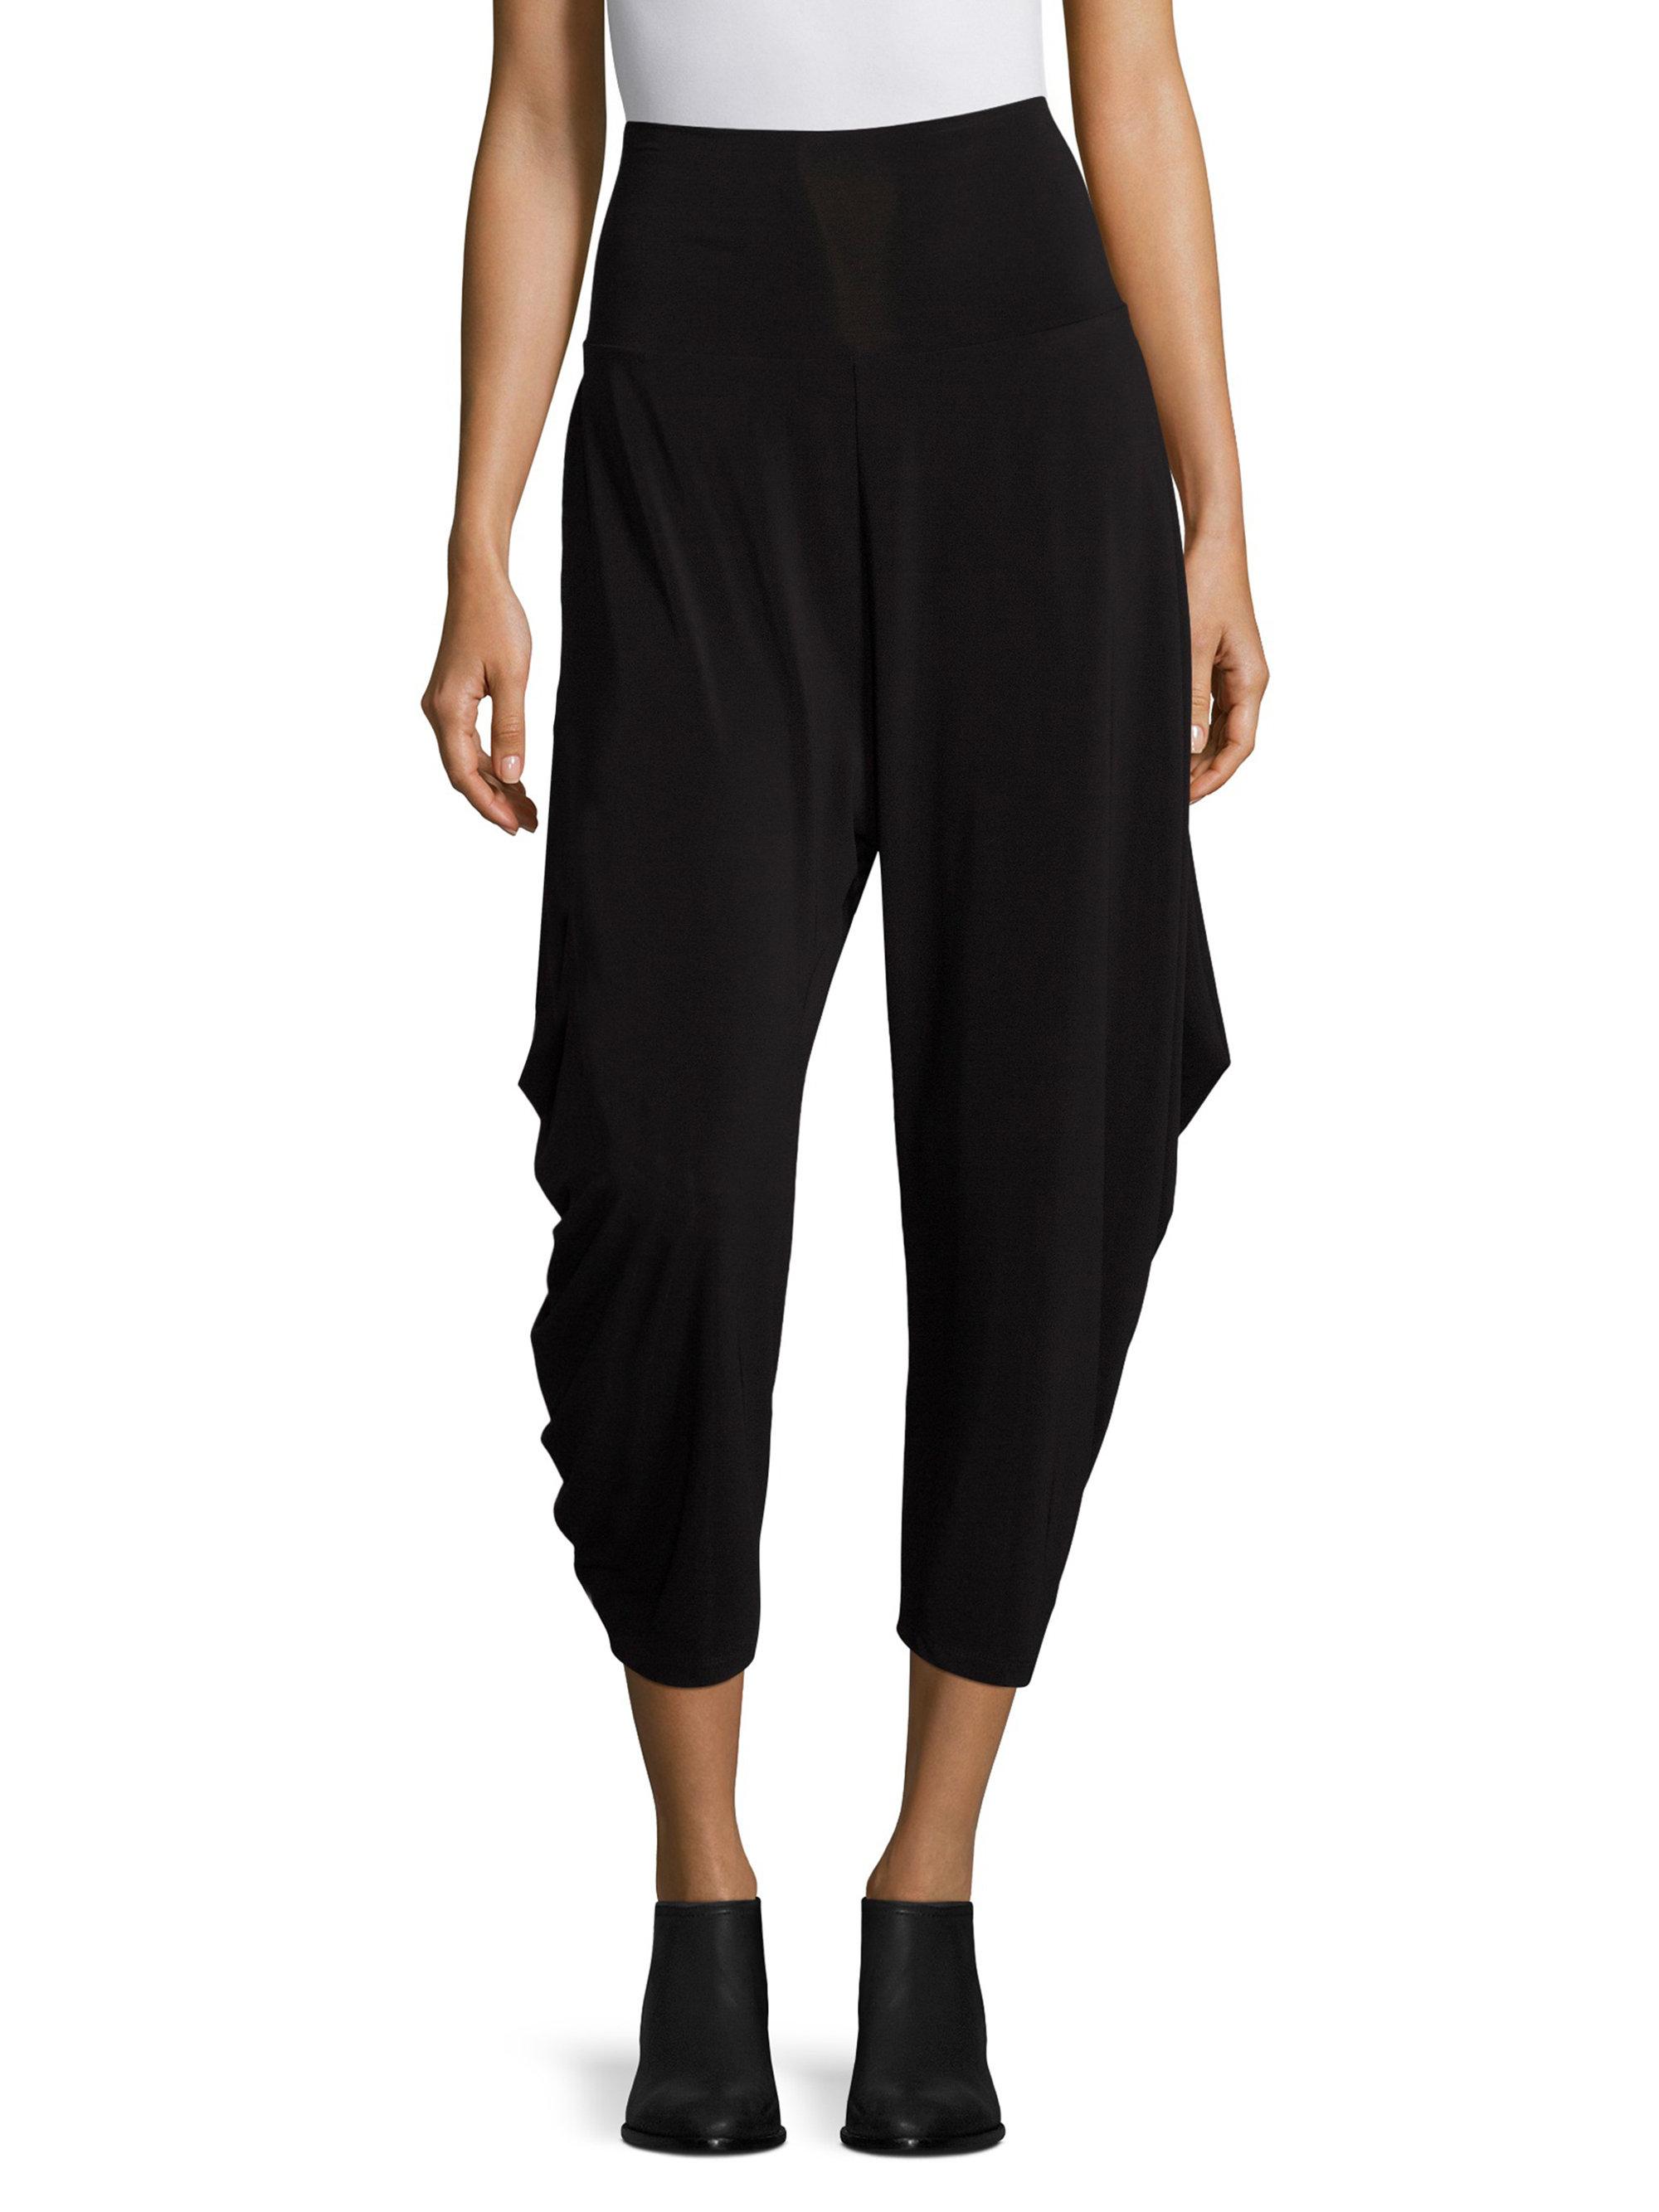 Issey Miyake Synthetic Draped Jersey Pants in Black - Lyst